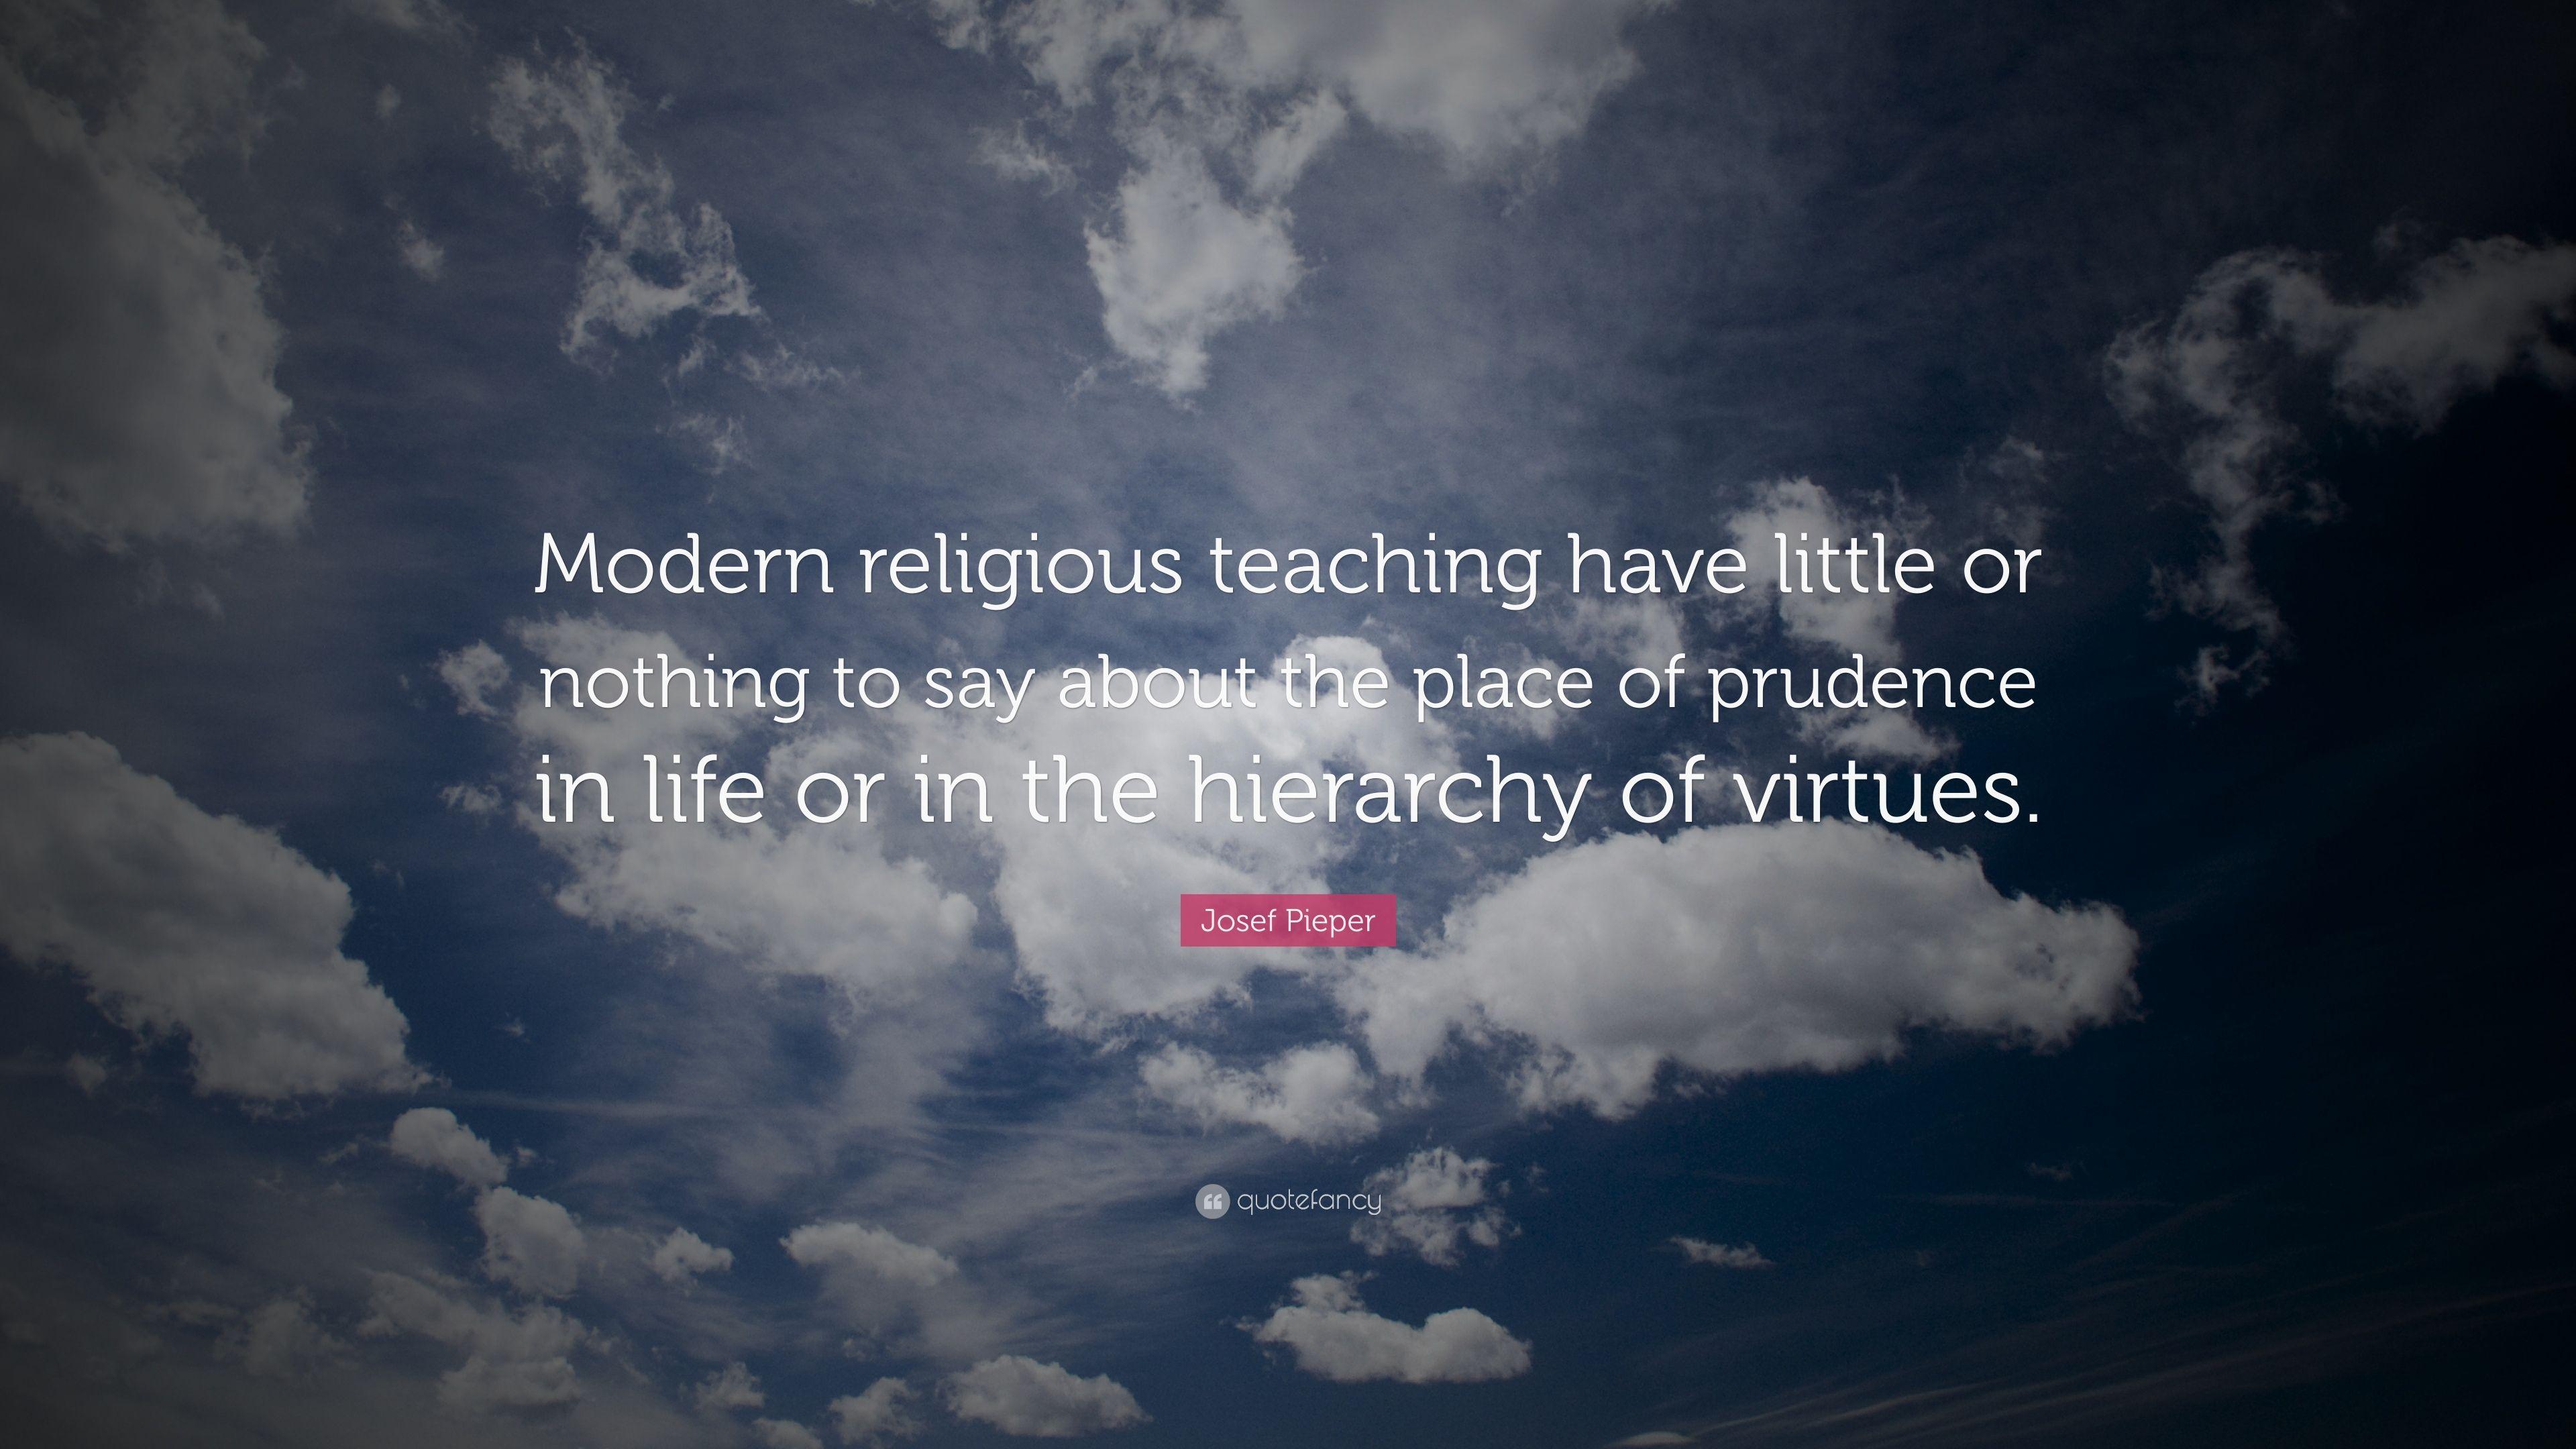 Josef Pieper Quote: “Modern religious teaching have little or